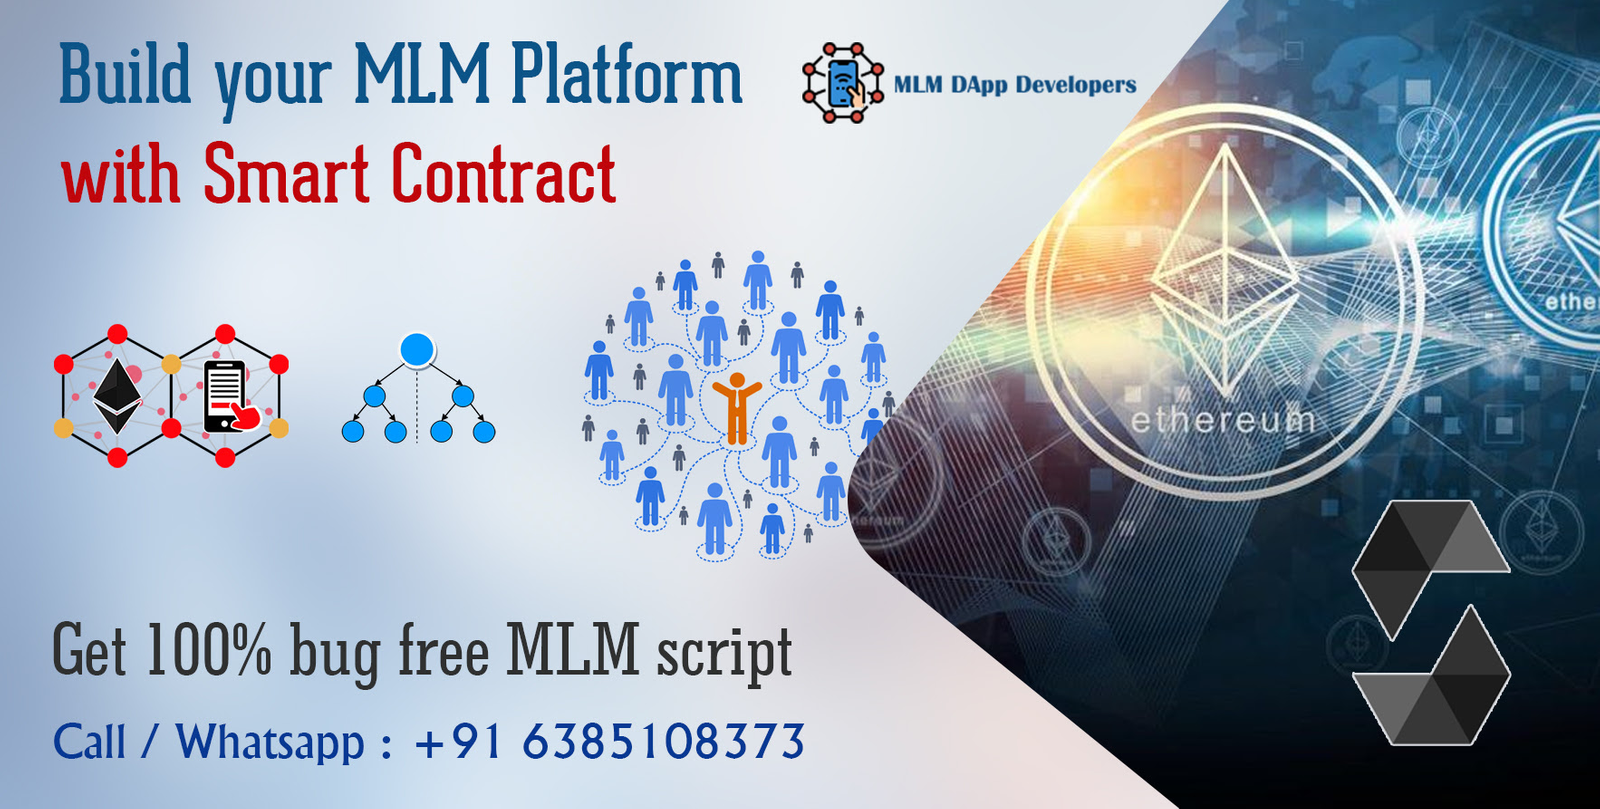 Decentralized MLM Software with Smart contracts-MLM Dapp developers